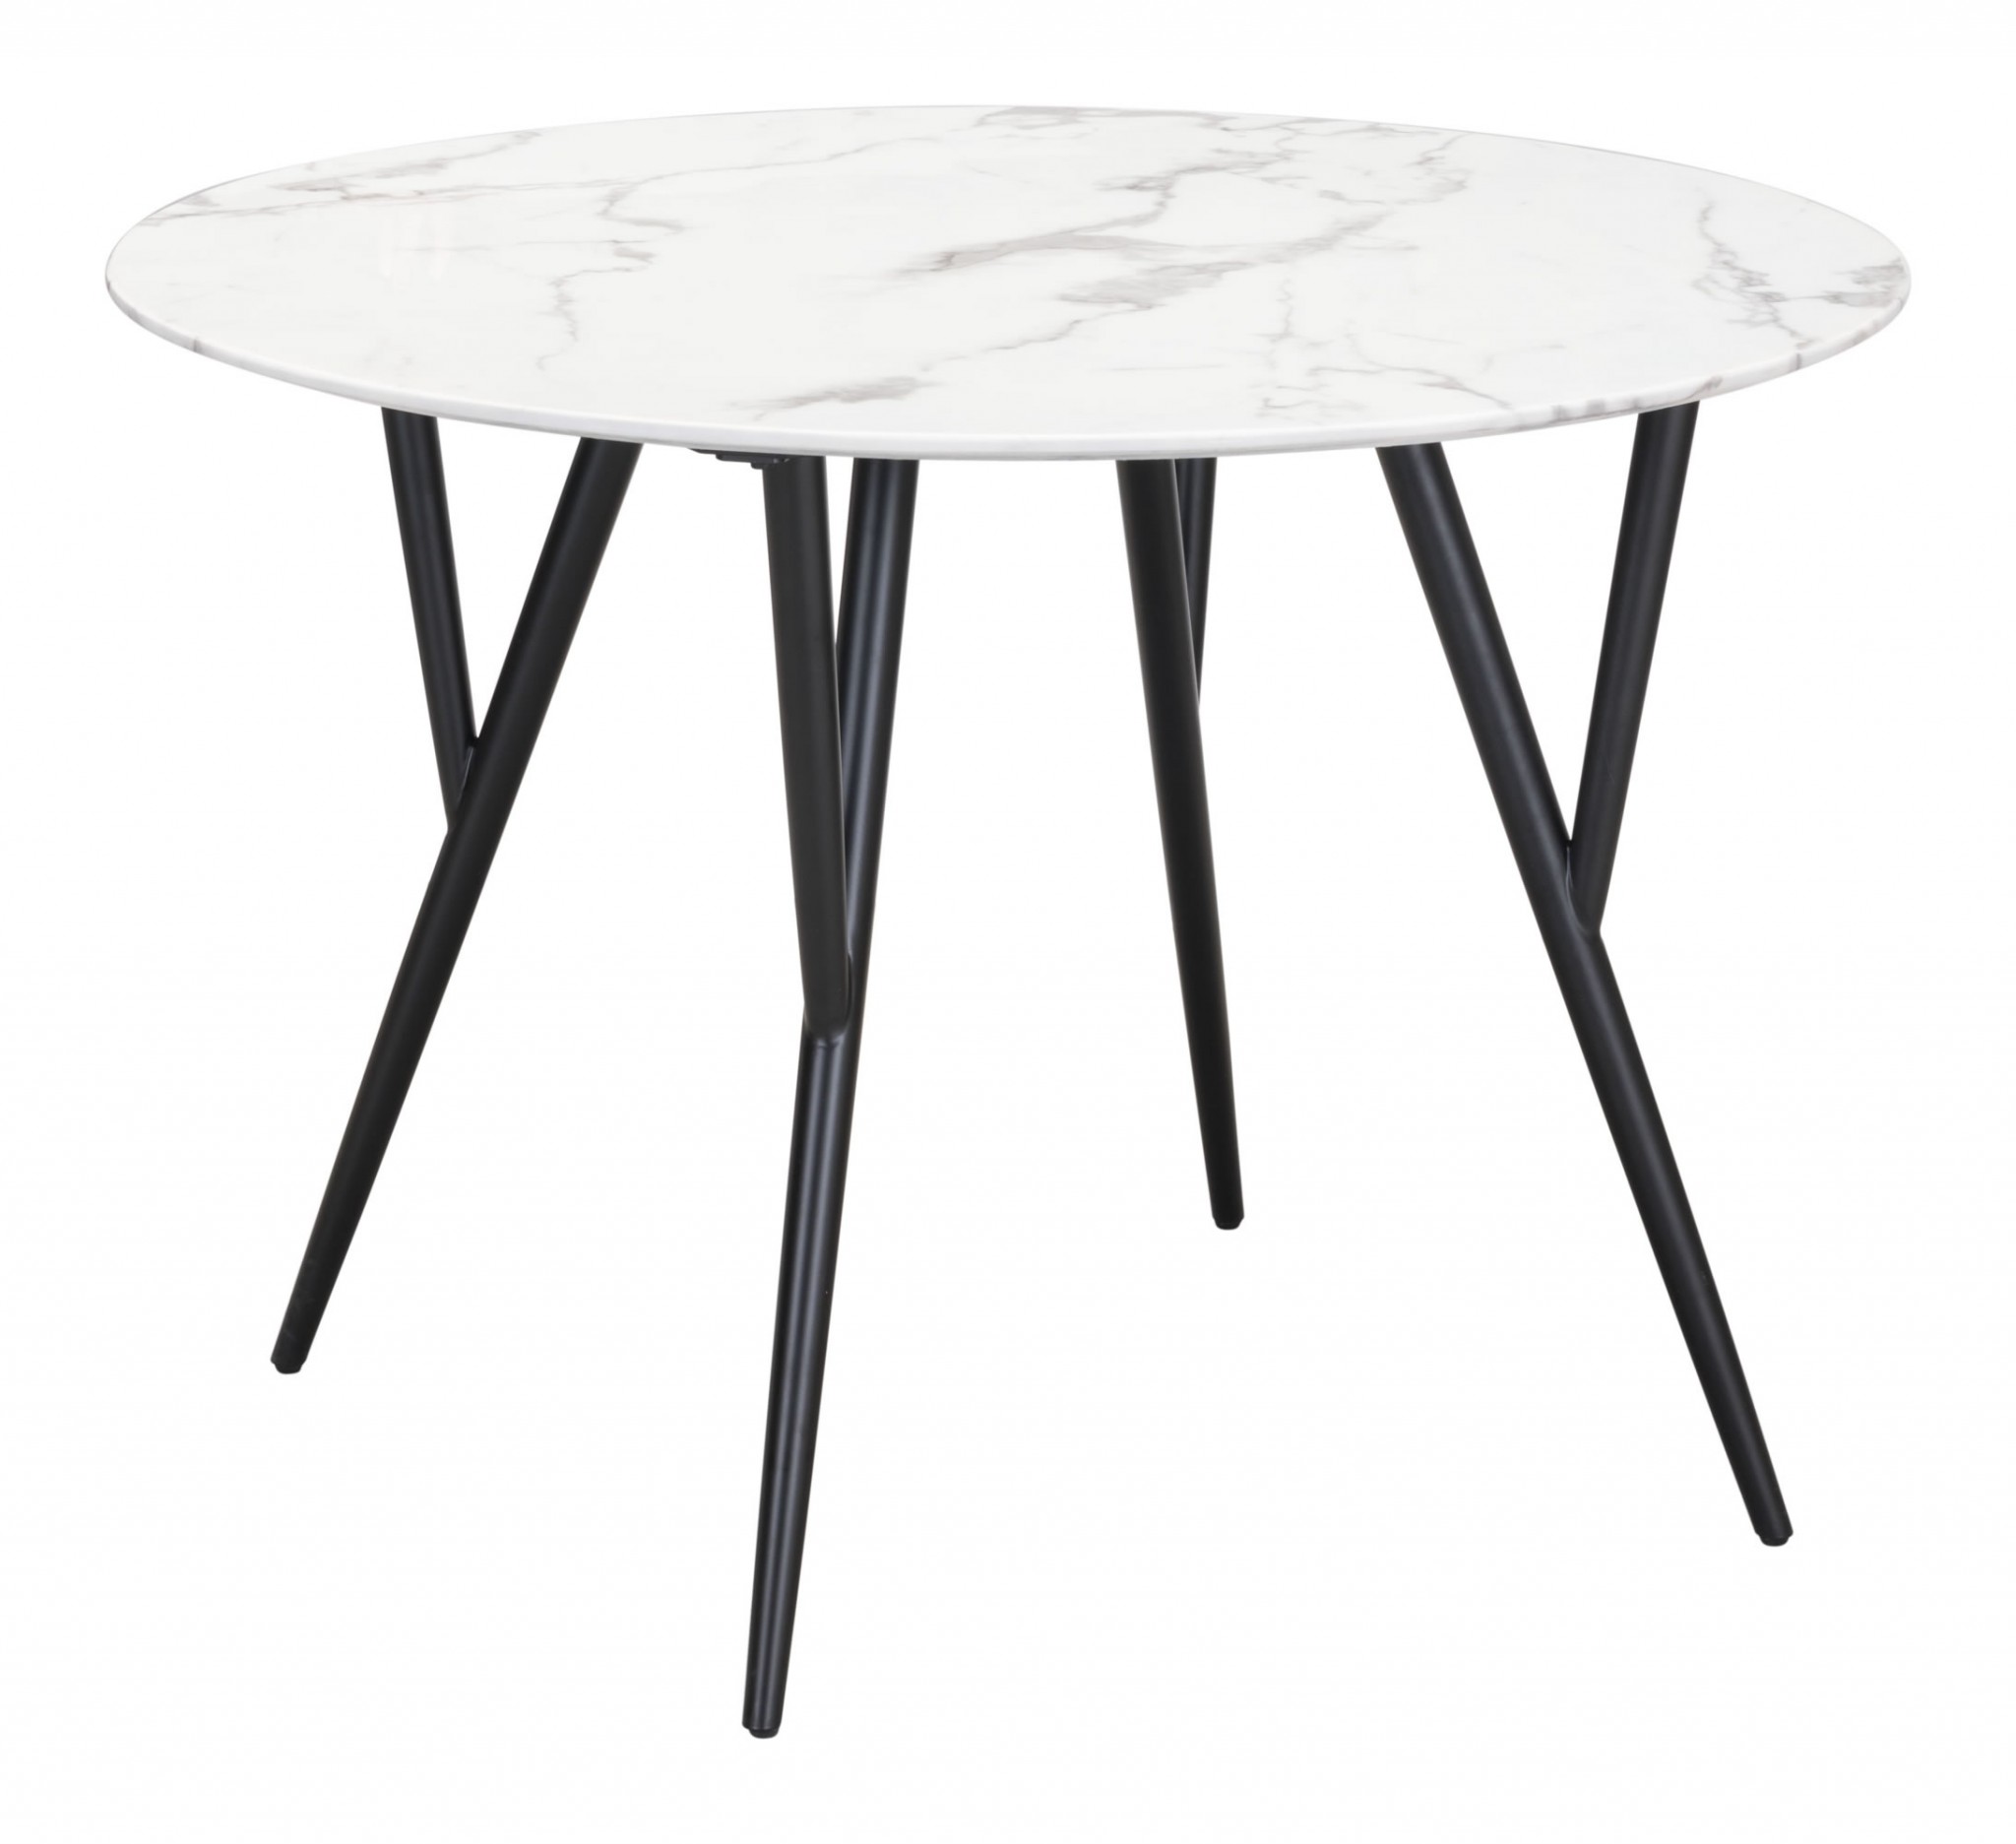 42.1" x 42.1" x 29.9" Stone & Matte Black, Faux Marble, Steel, Dining Table